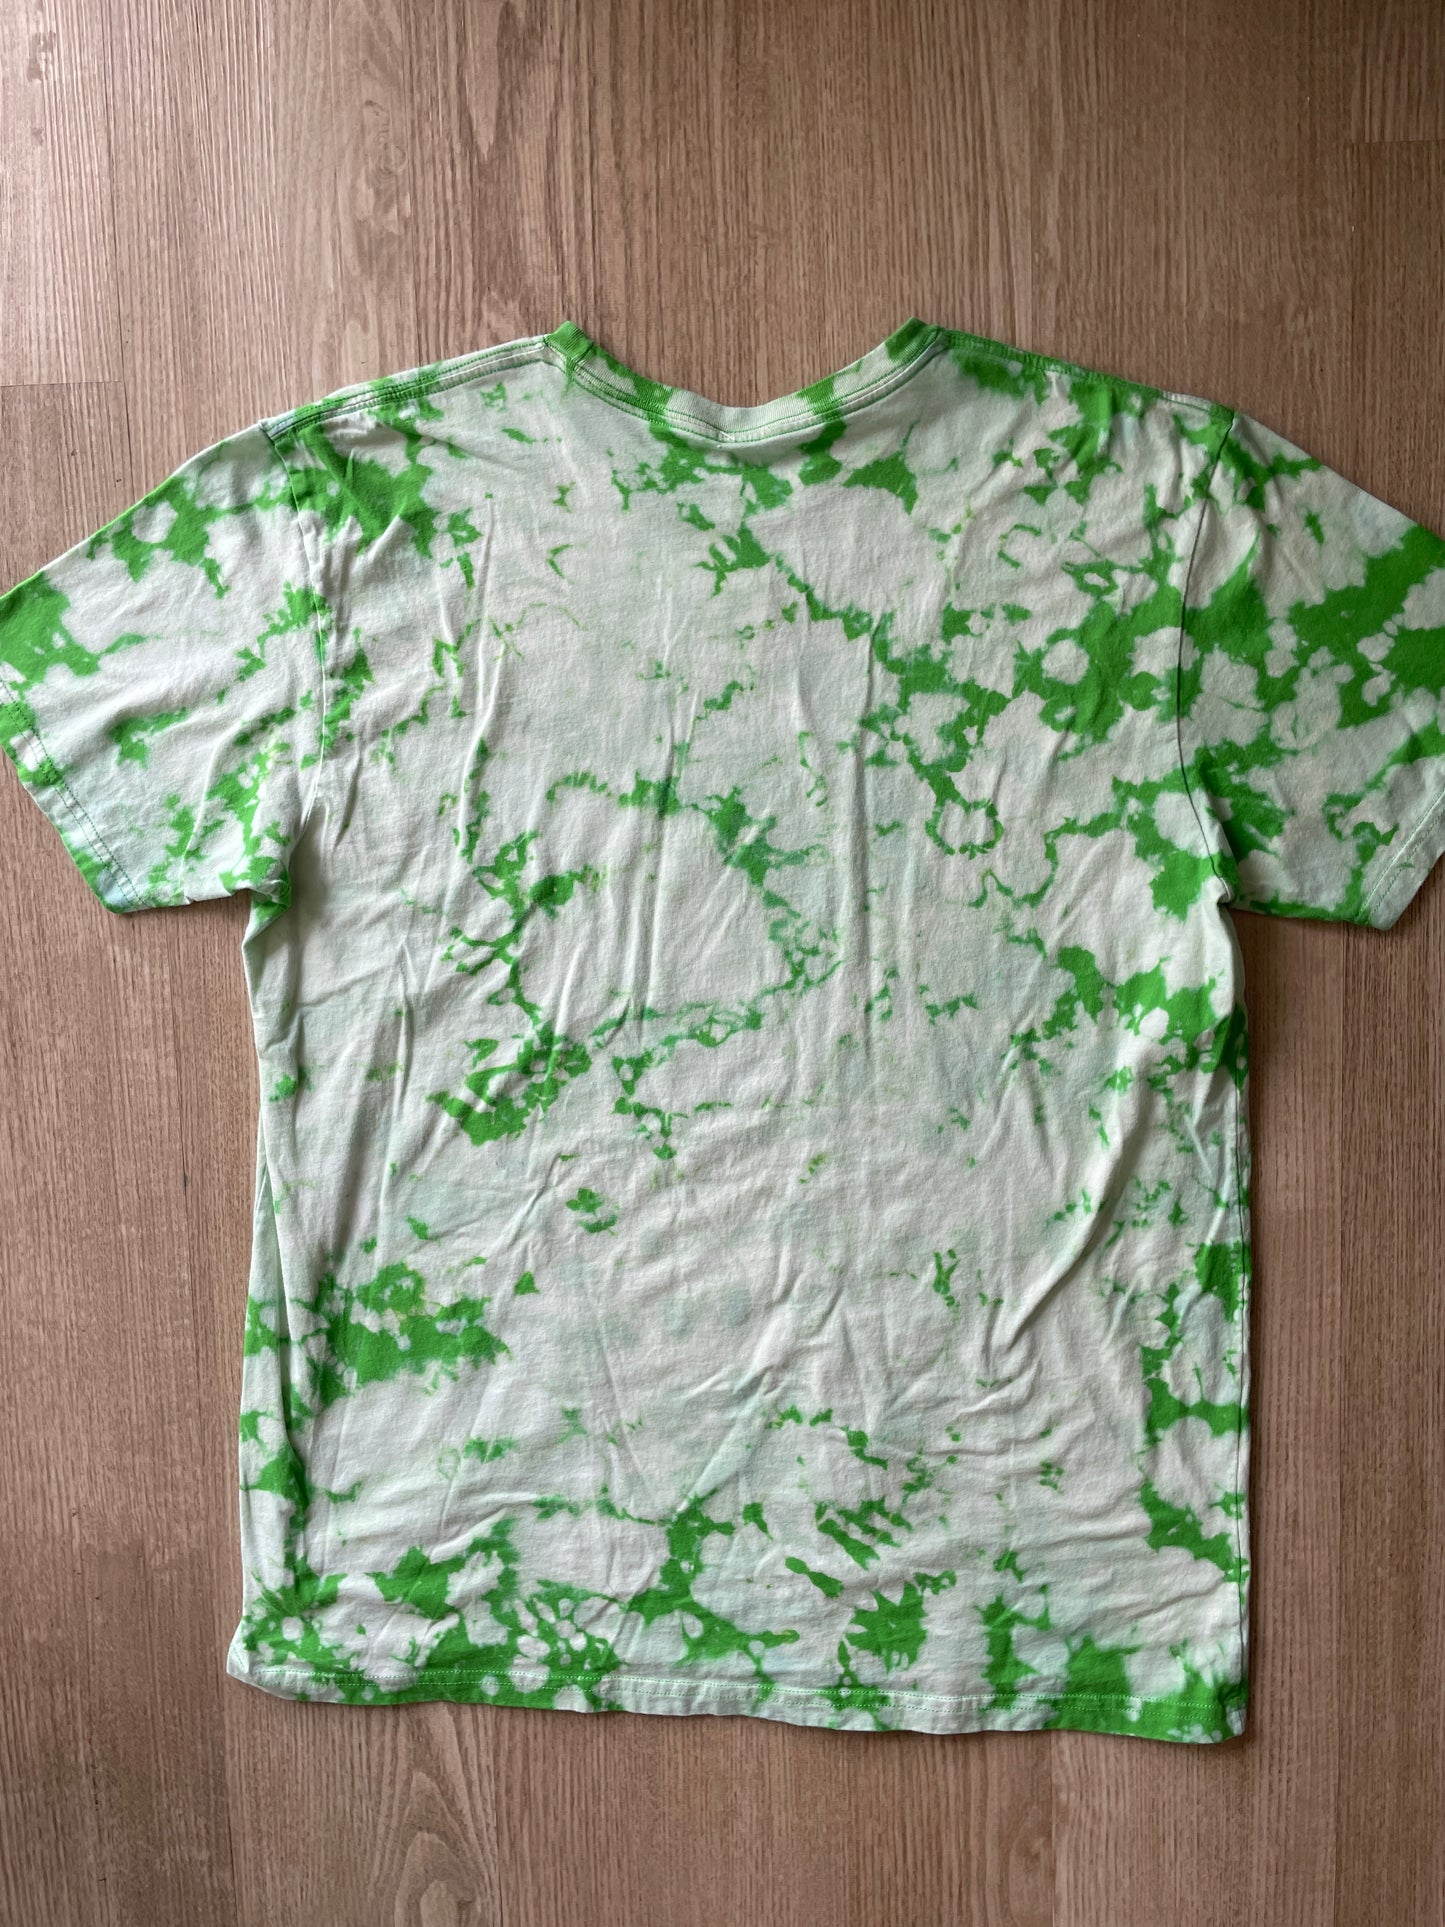 XL Men’s Delicate Arch Topography Acid Dye T-Shirt | One-Of-a-Kind Green and White Crumpled Short Sleeve